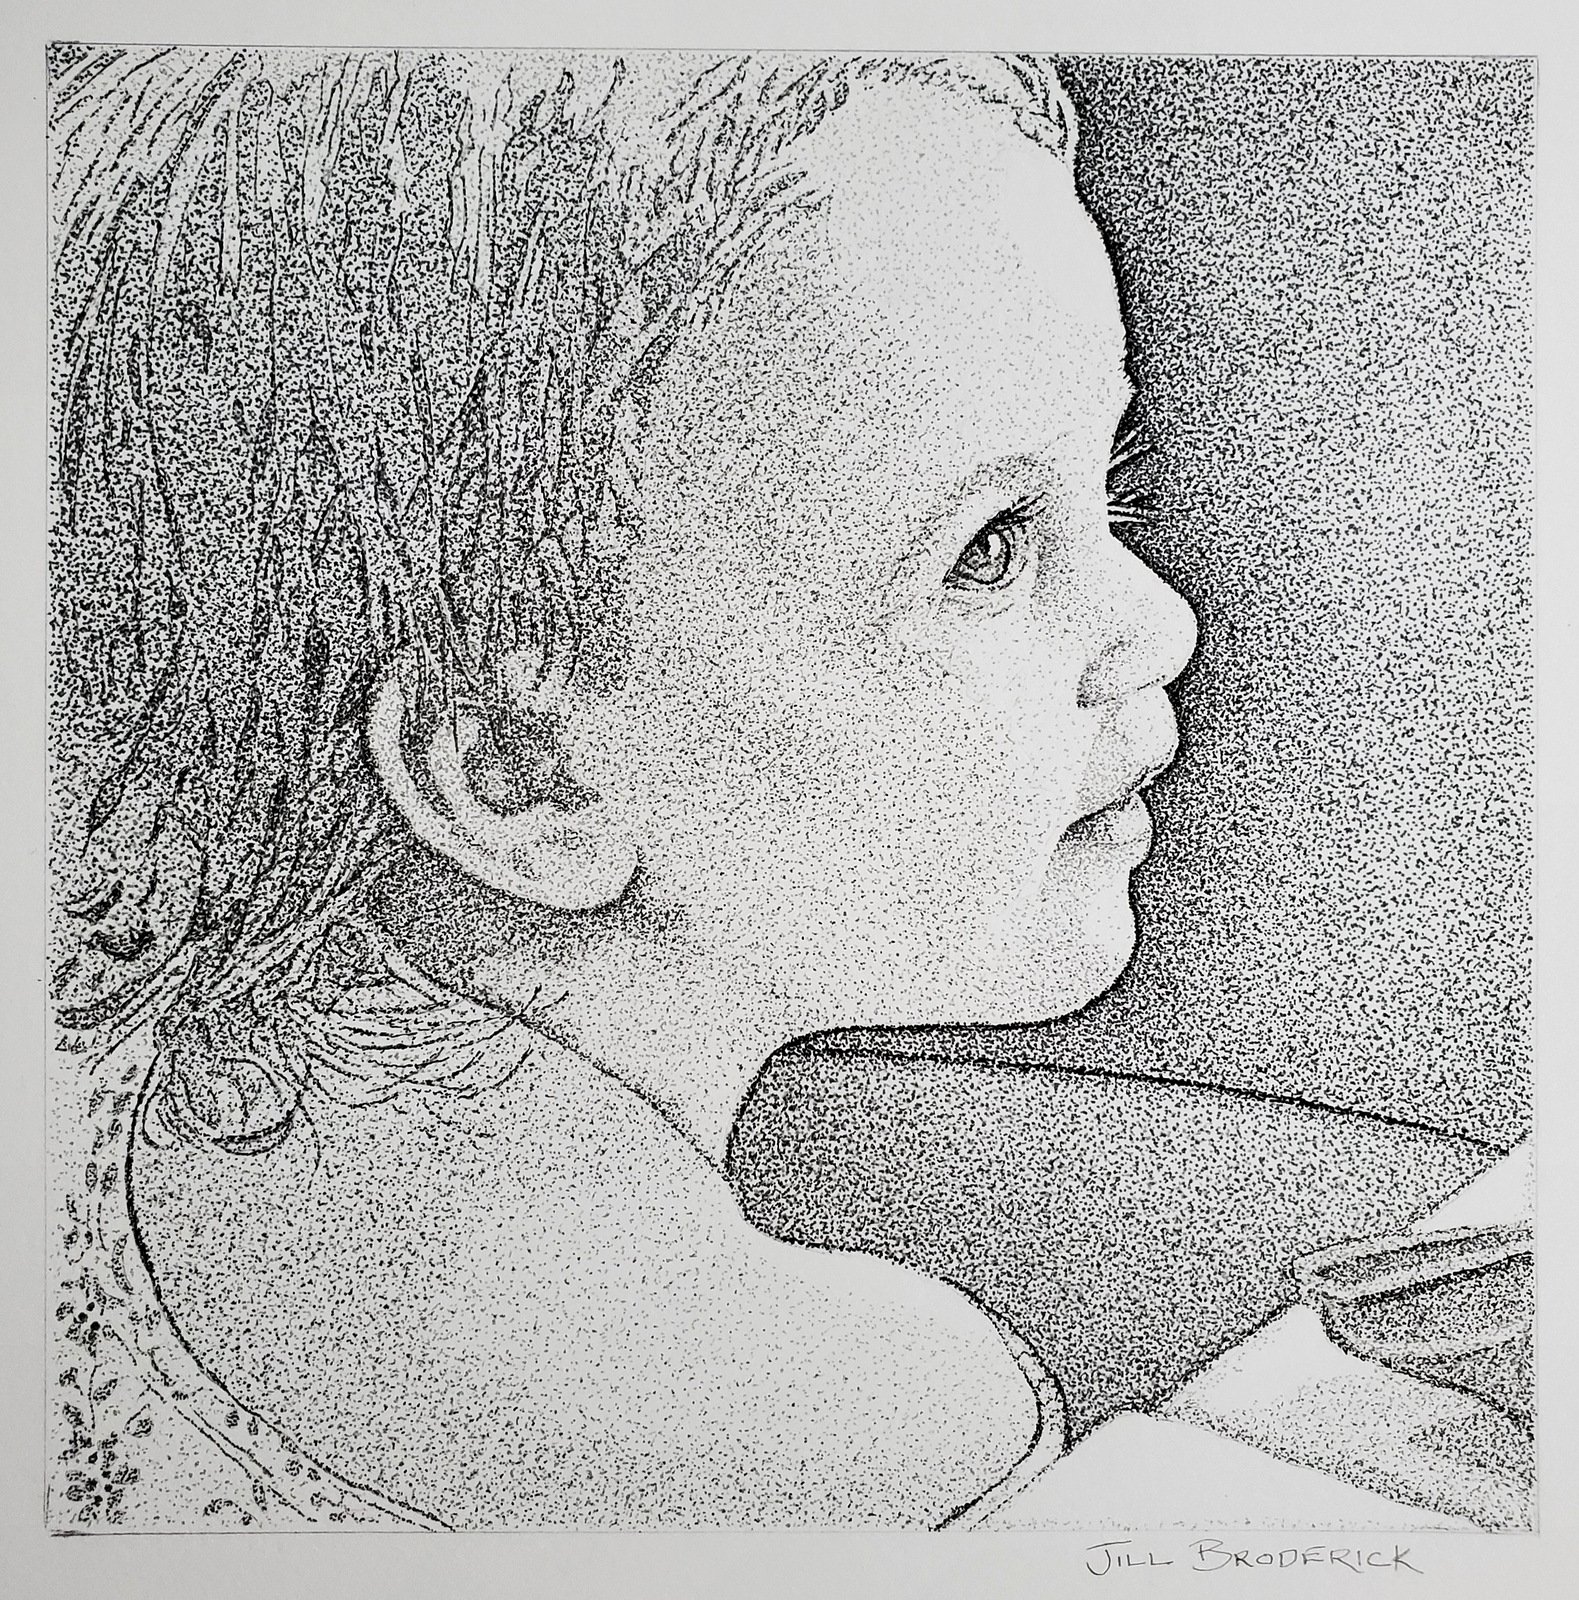 PORTRAIT - PEN AND INK ON PAPER - 8X8 IN.